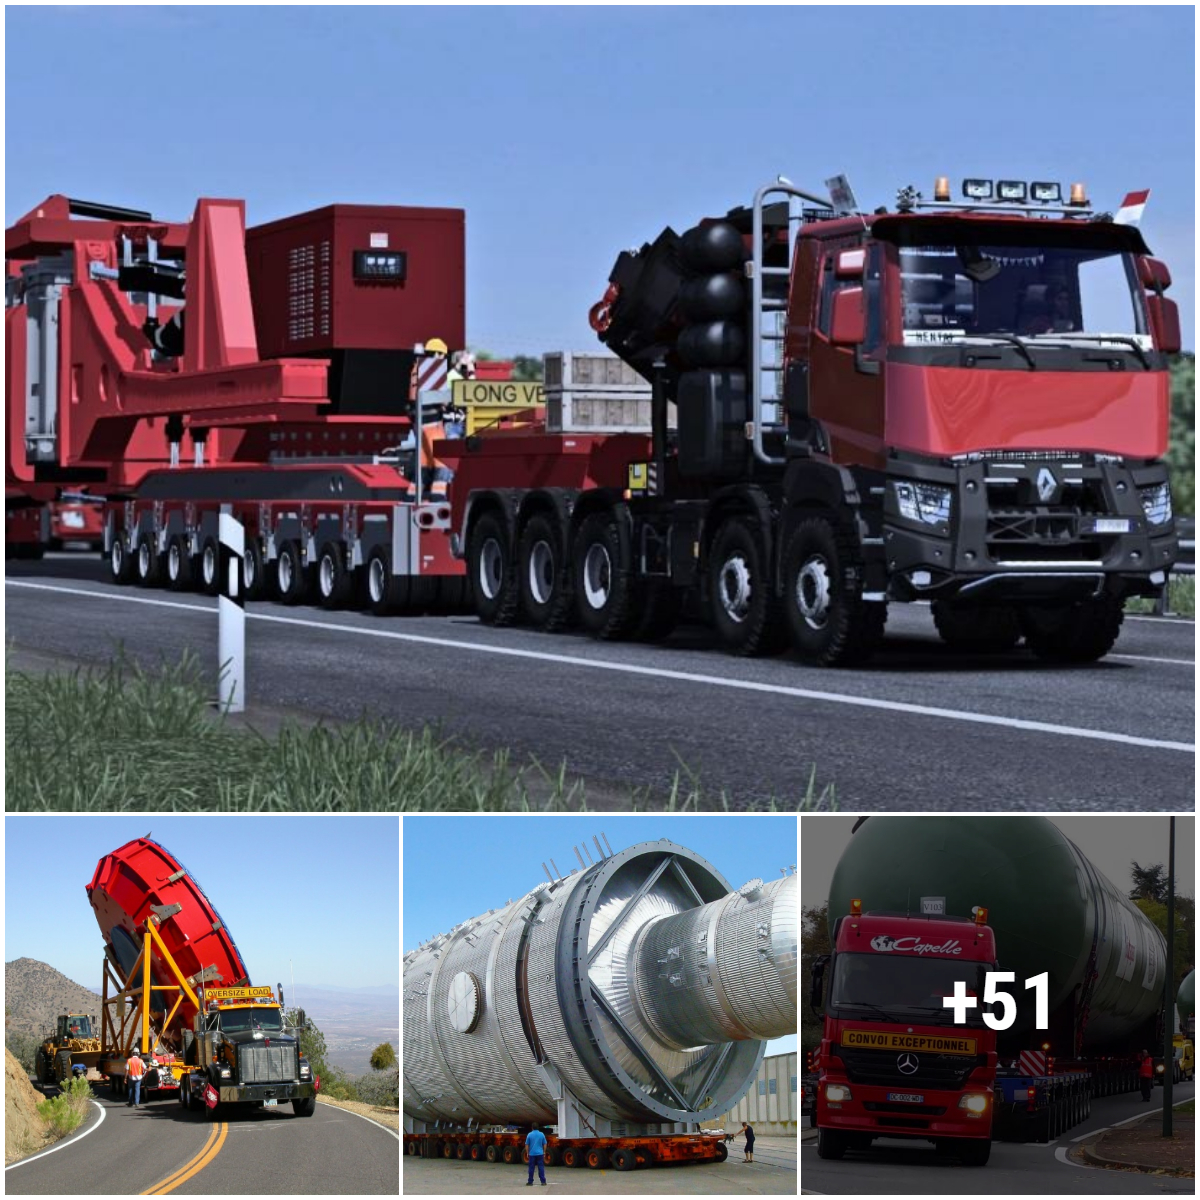 Explore knowledge about heavy vehicles: Improve the ability to operate large 500-ton trucks